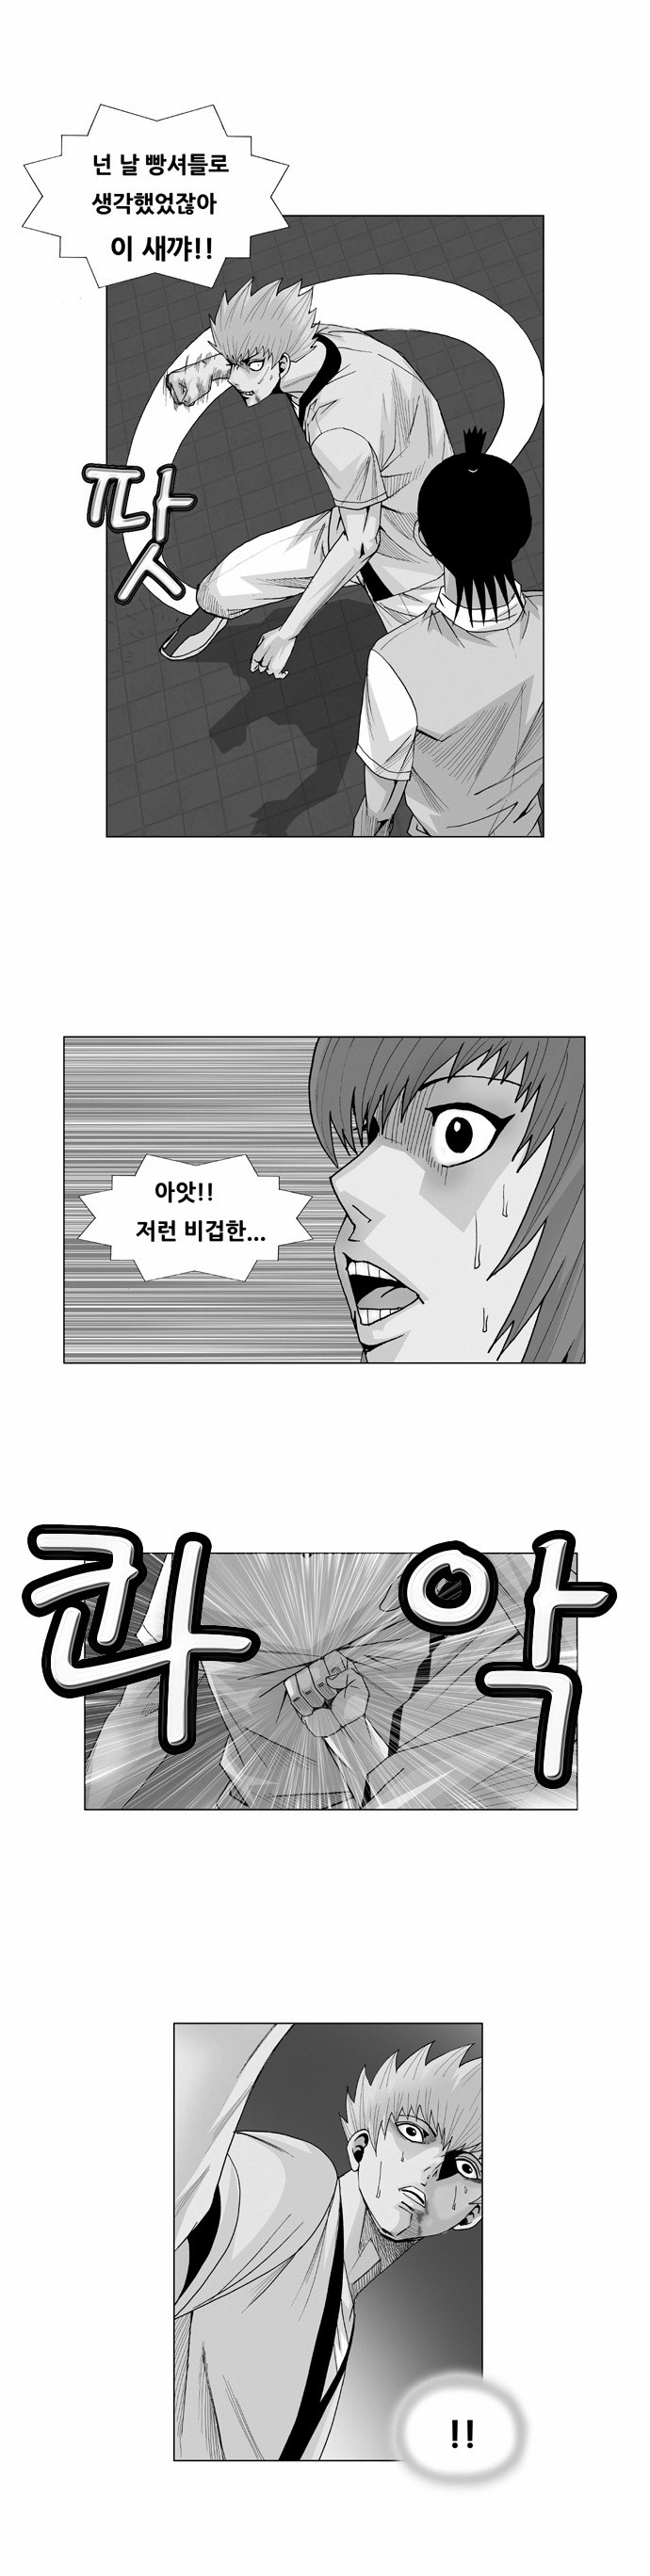 Ultimate Legend - Kang Hae Hyo - Chapter 38 - Page 1